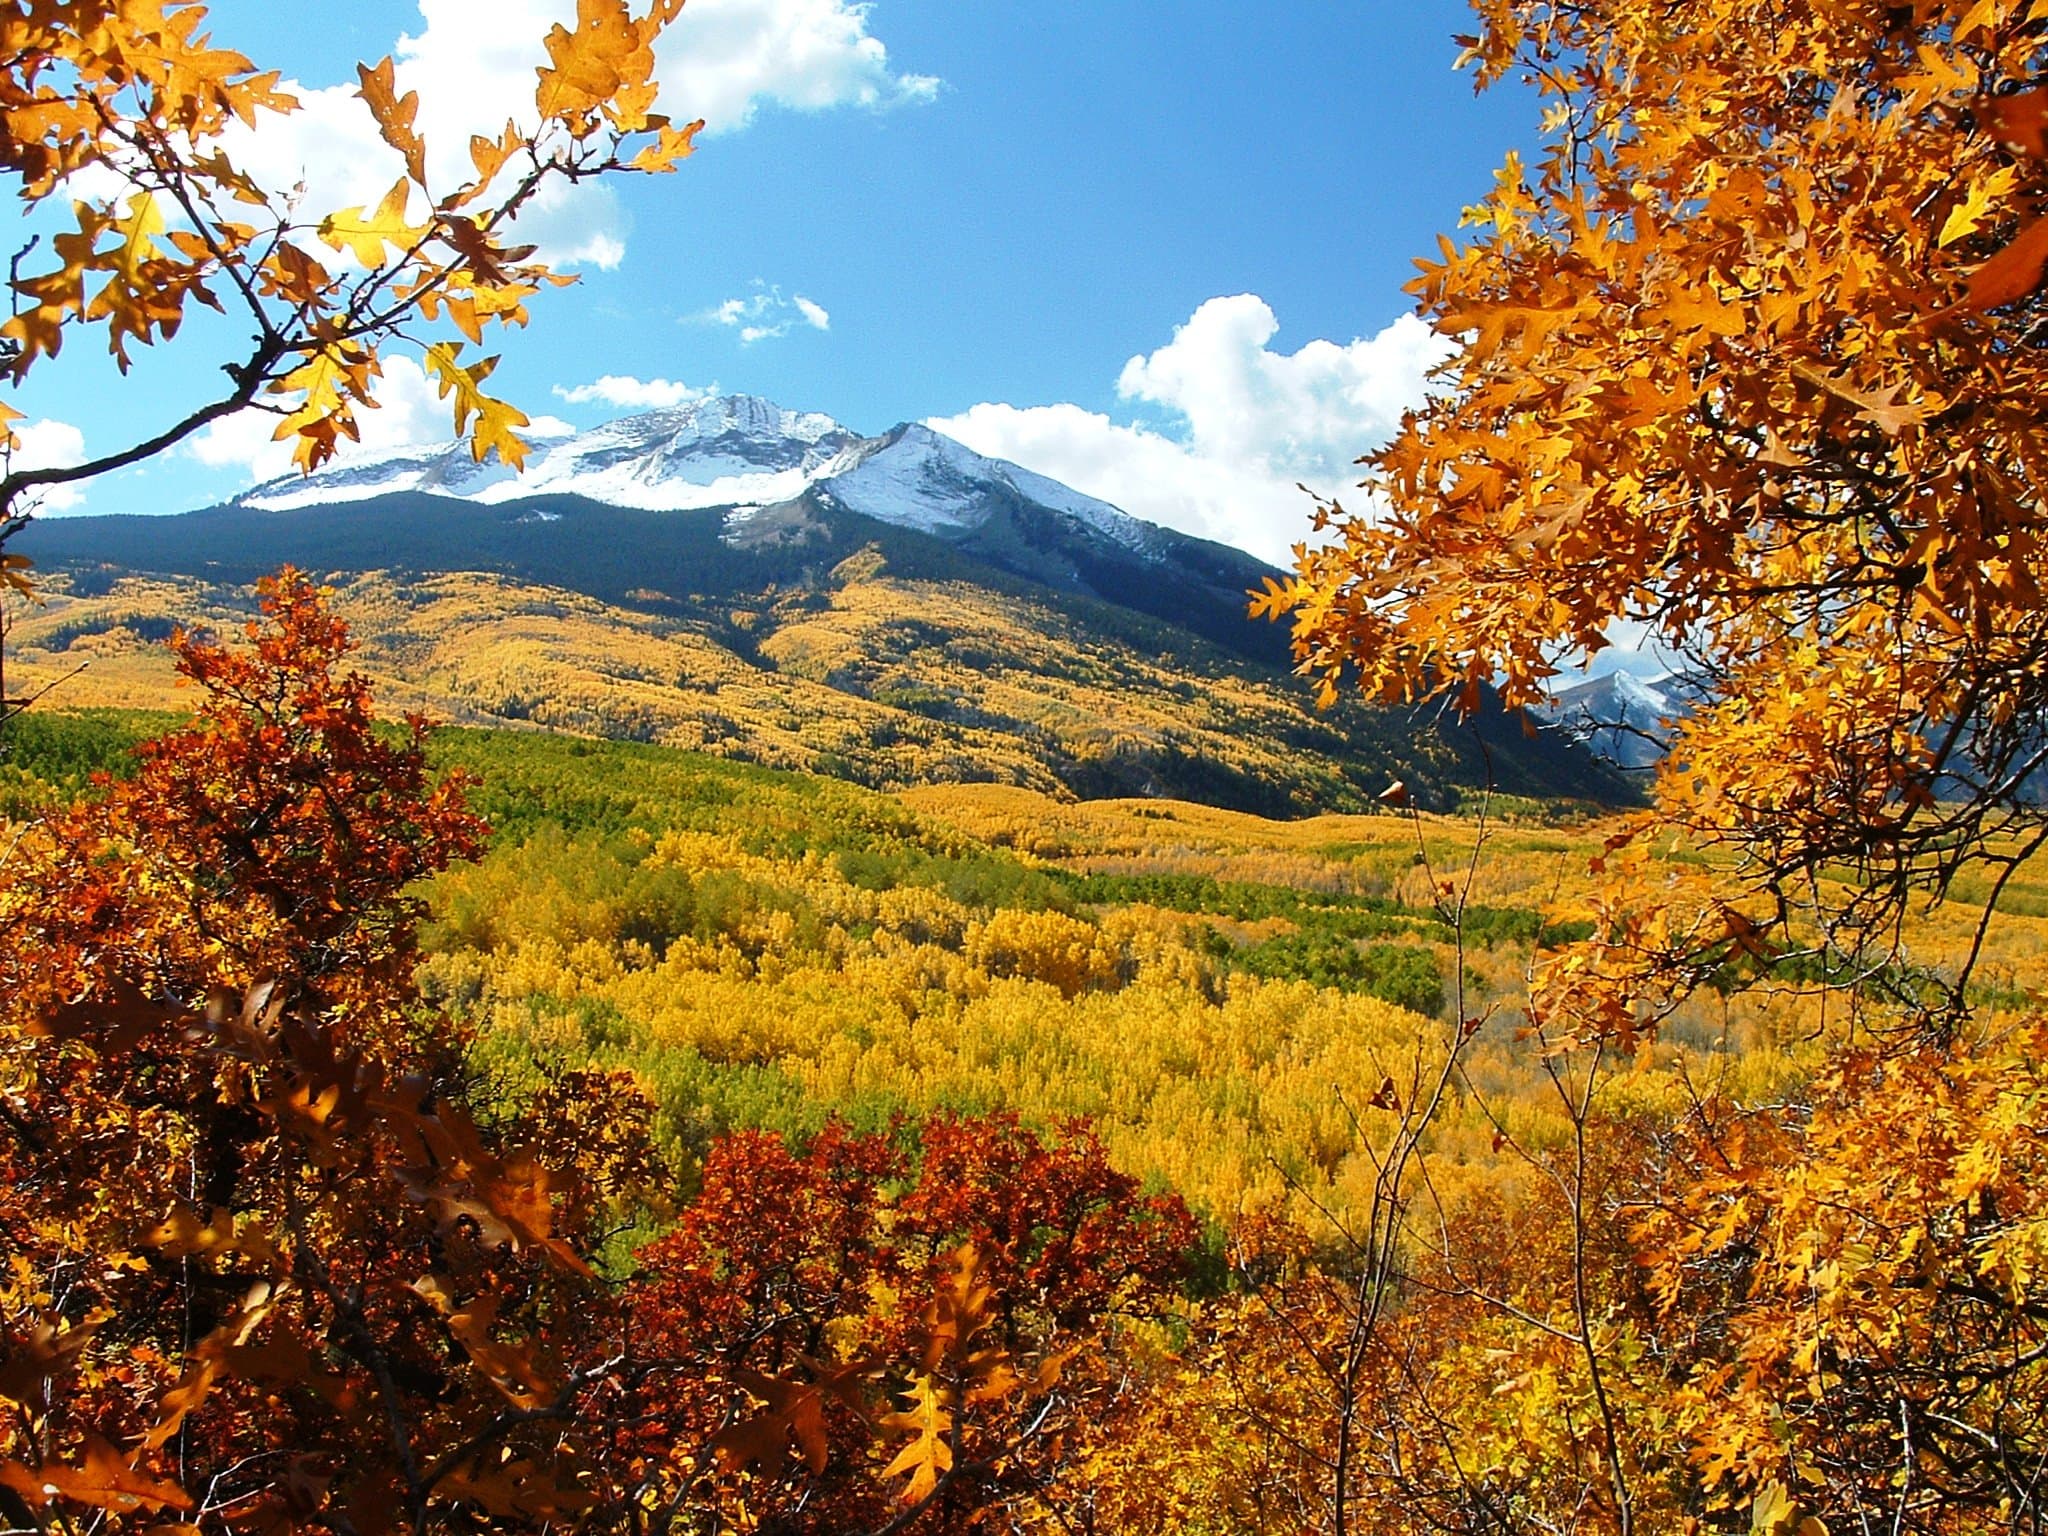 Fall Foliage on Kebler Pass near Crested Butte in Colorado.